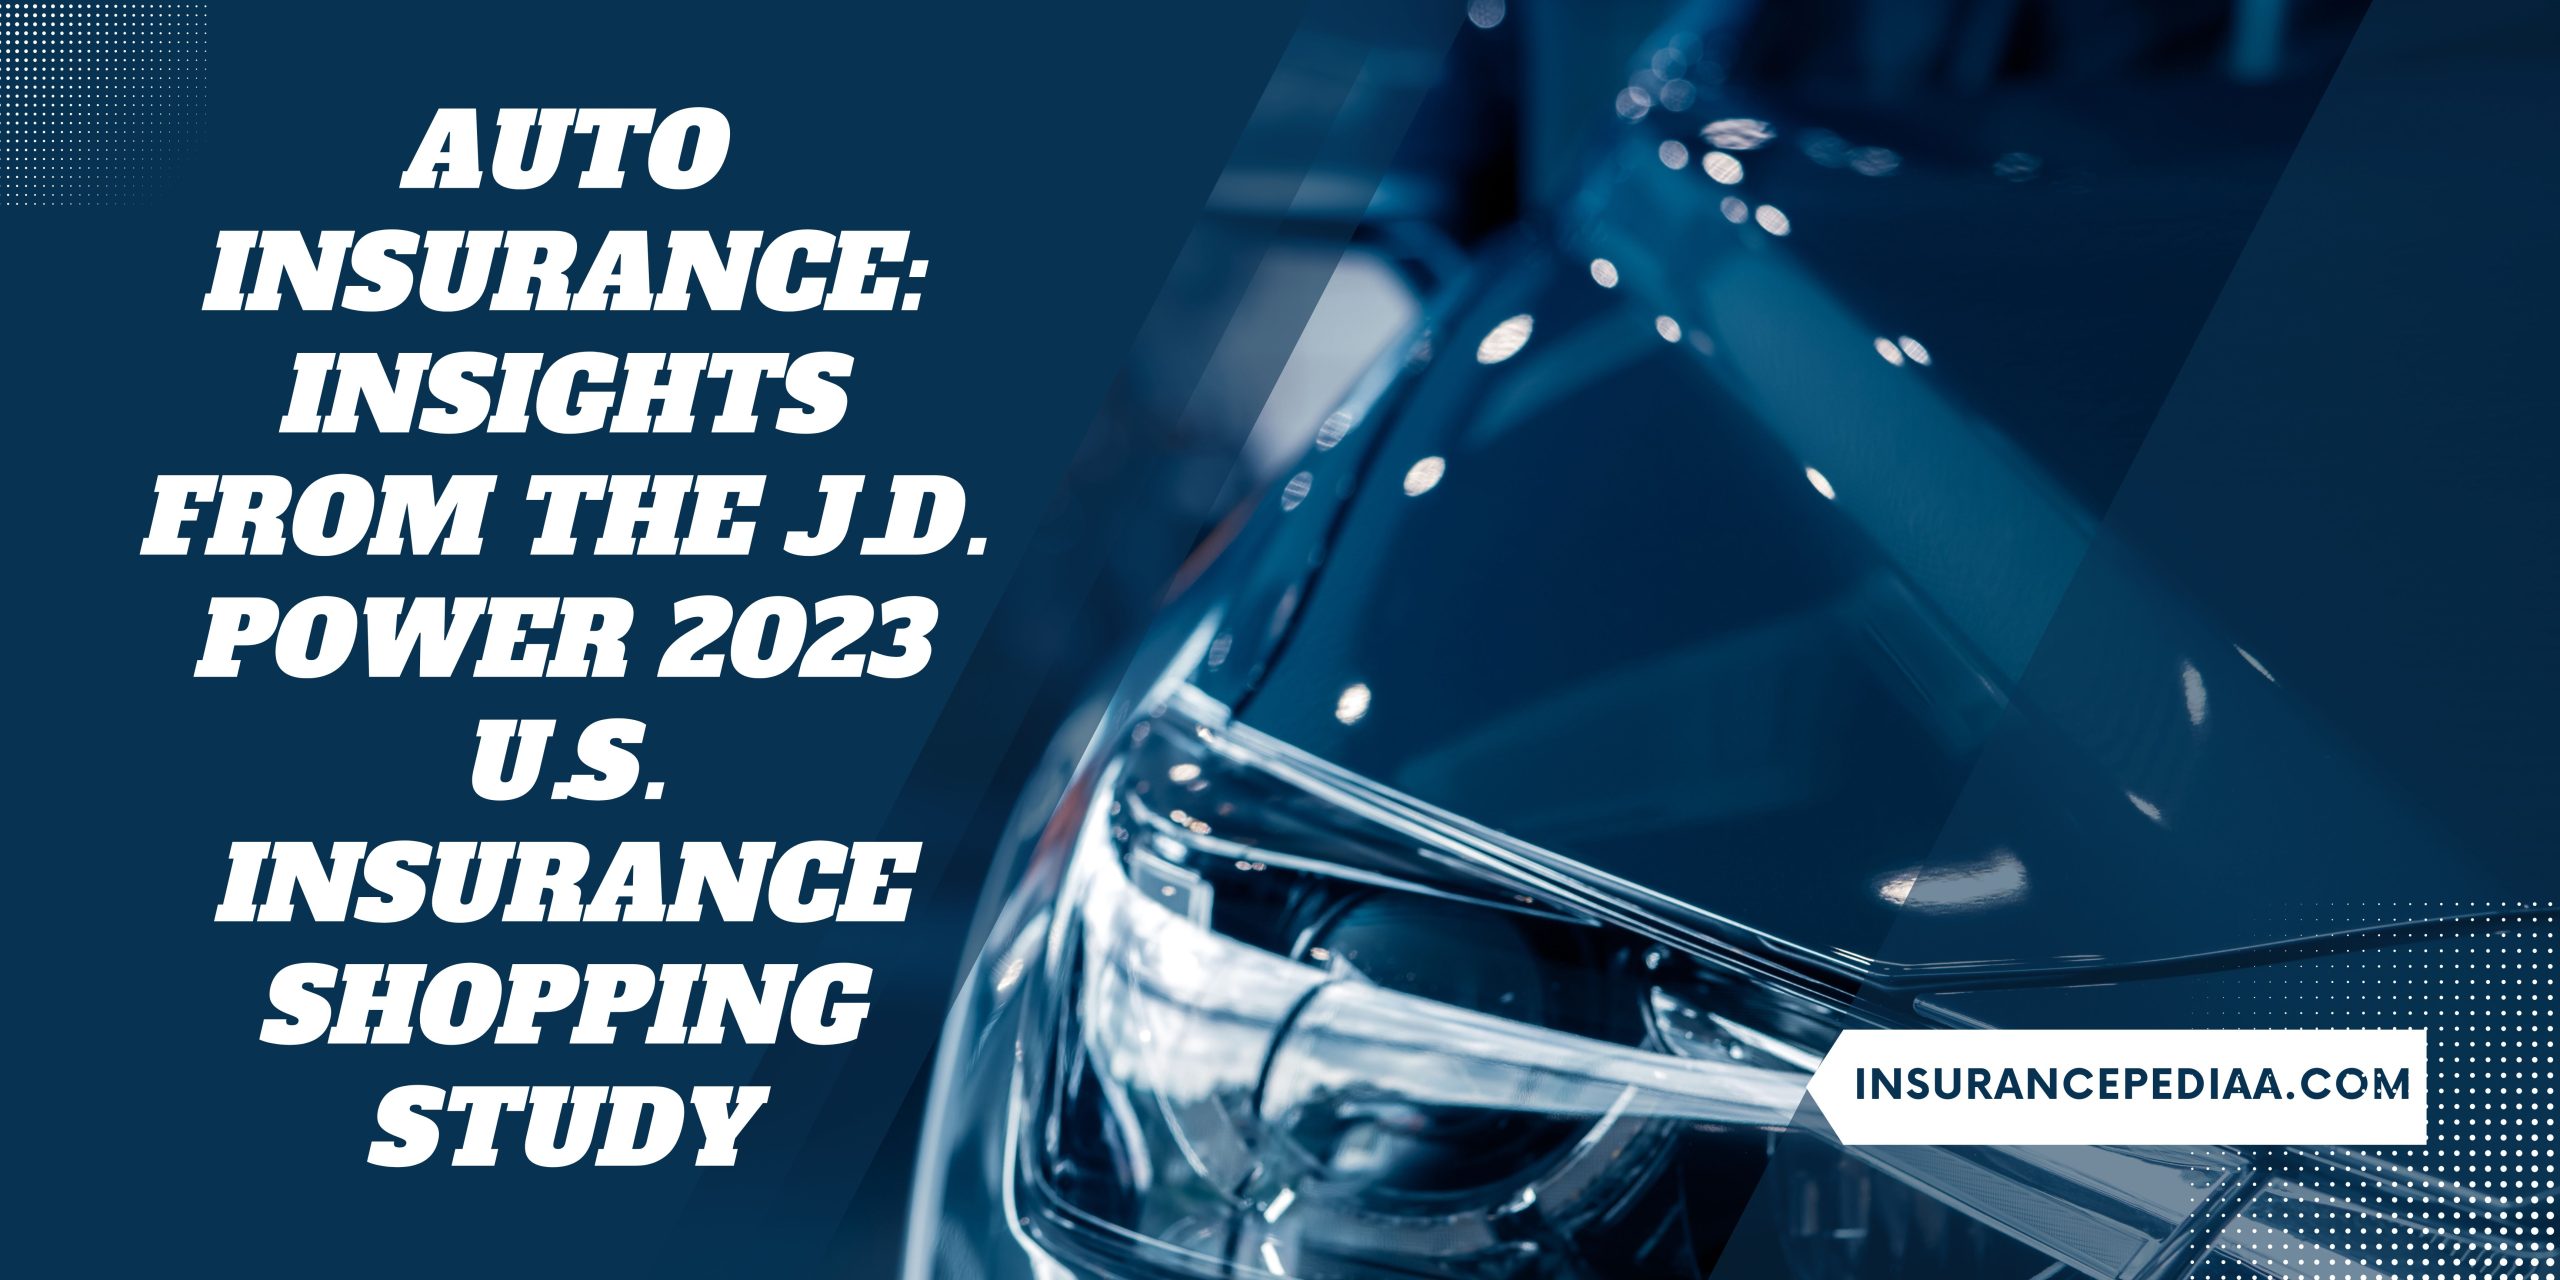 Auto Insurance: Insights from the J.D. Power 2023 U.S. Insurance Shopping Study